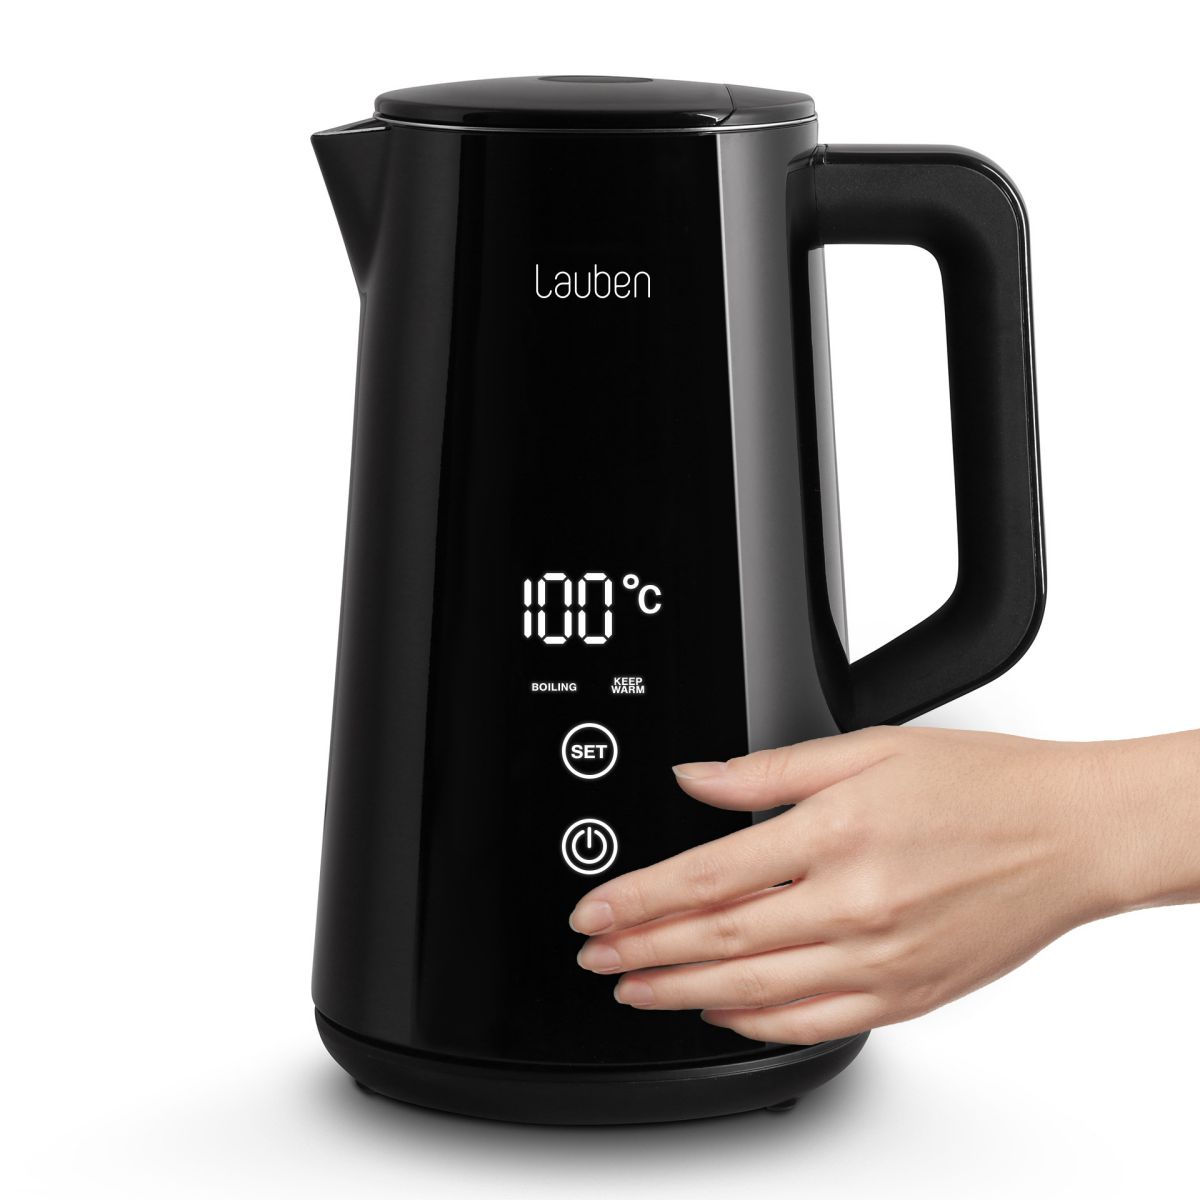 https://www.lauben.com/img/products/electric_kettle_1800bc/distribution/01.jpg